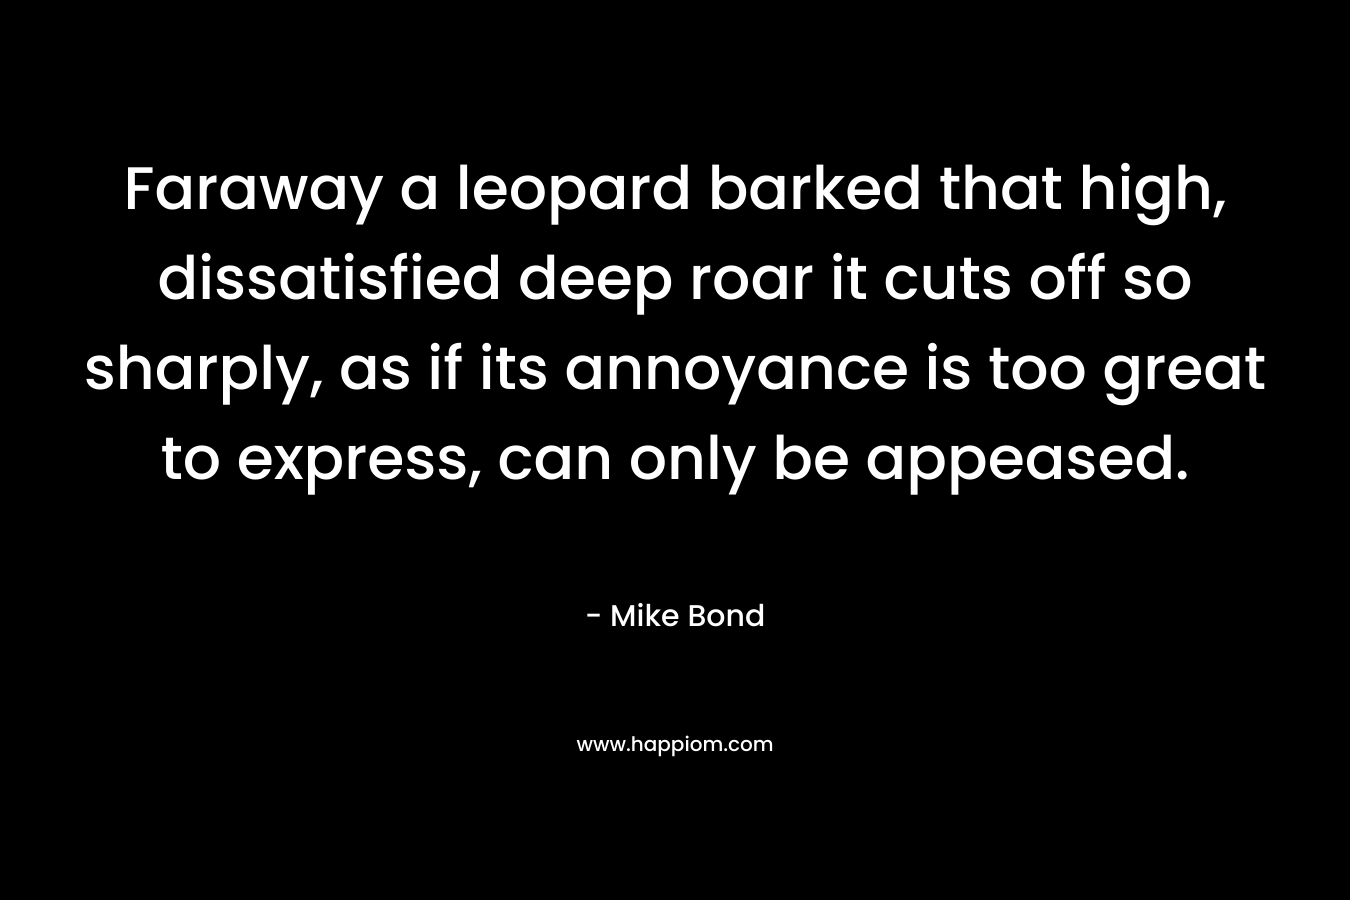 Faraway a leopard barked that high, dissatisfied deep roar it cuts off so sharply, as if its annoyance is too great to express, can only be appeased. – Mike Bond